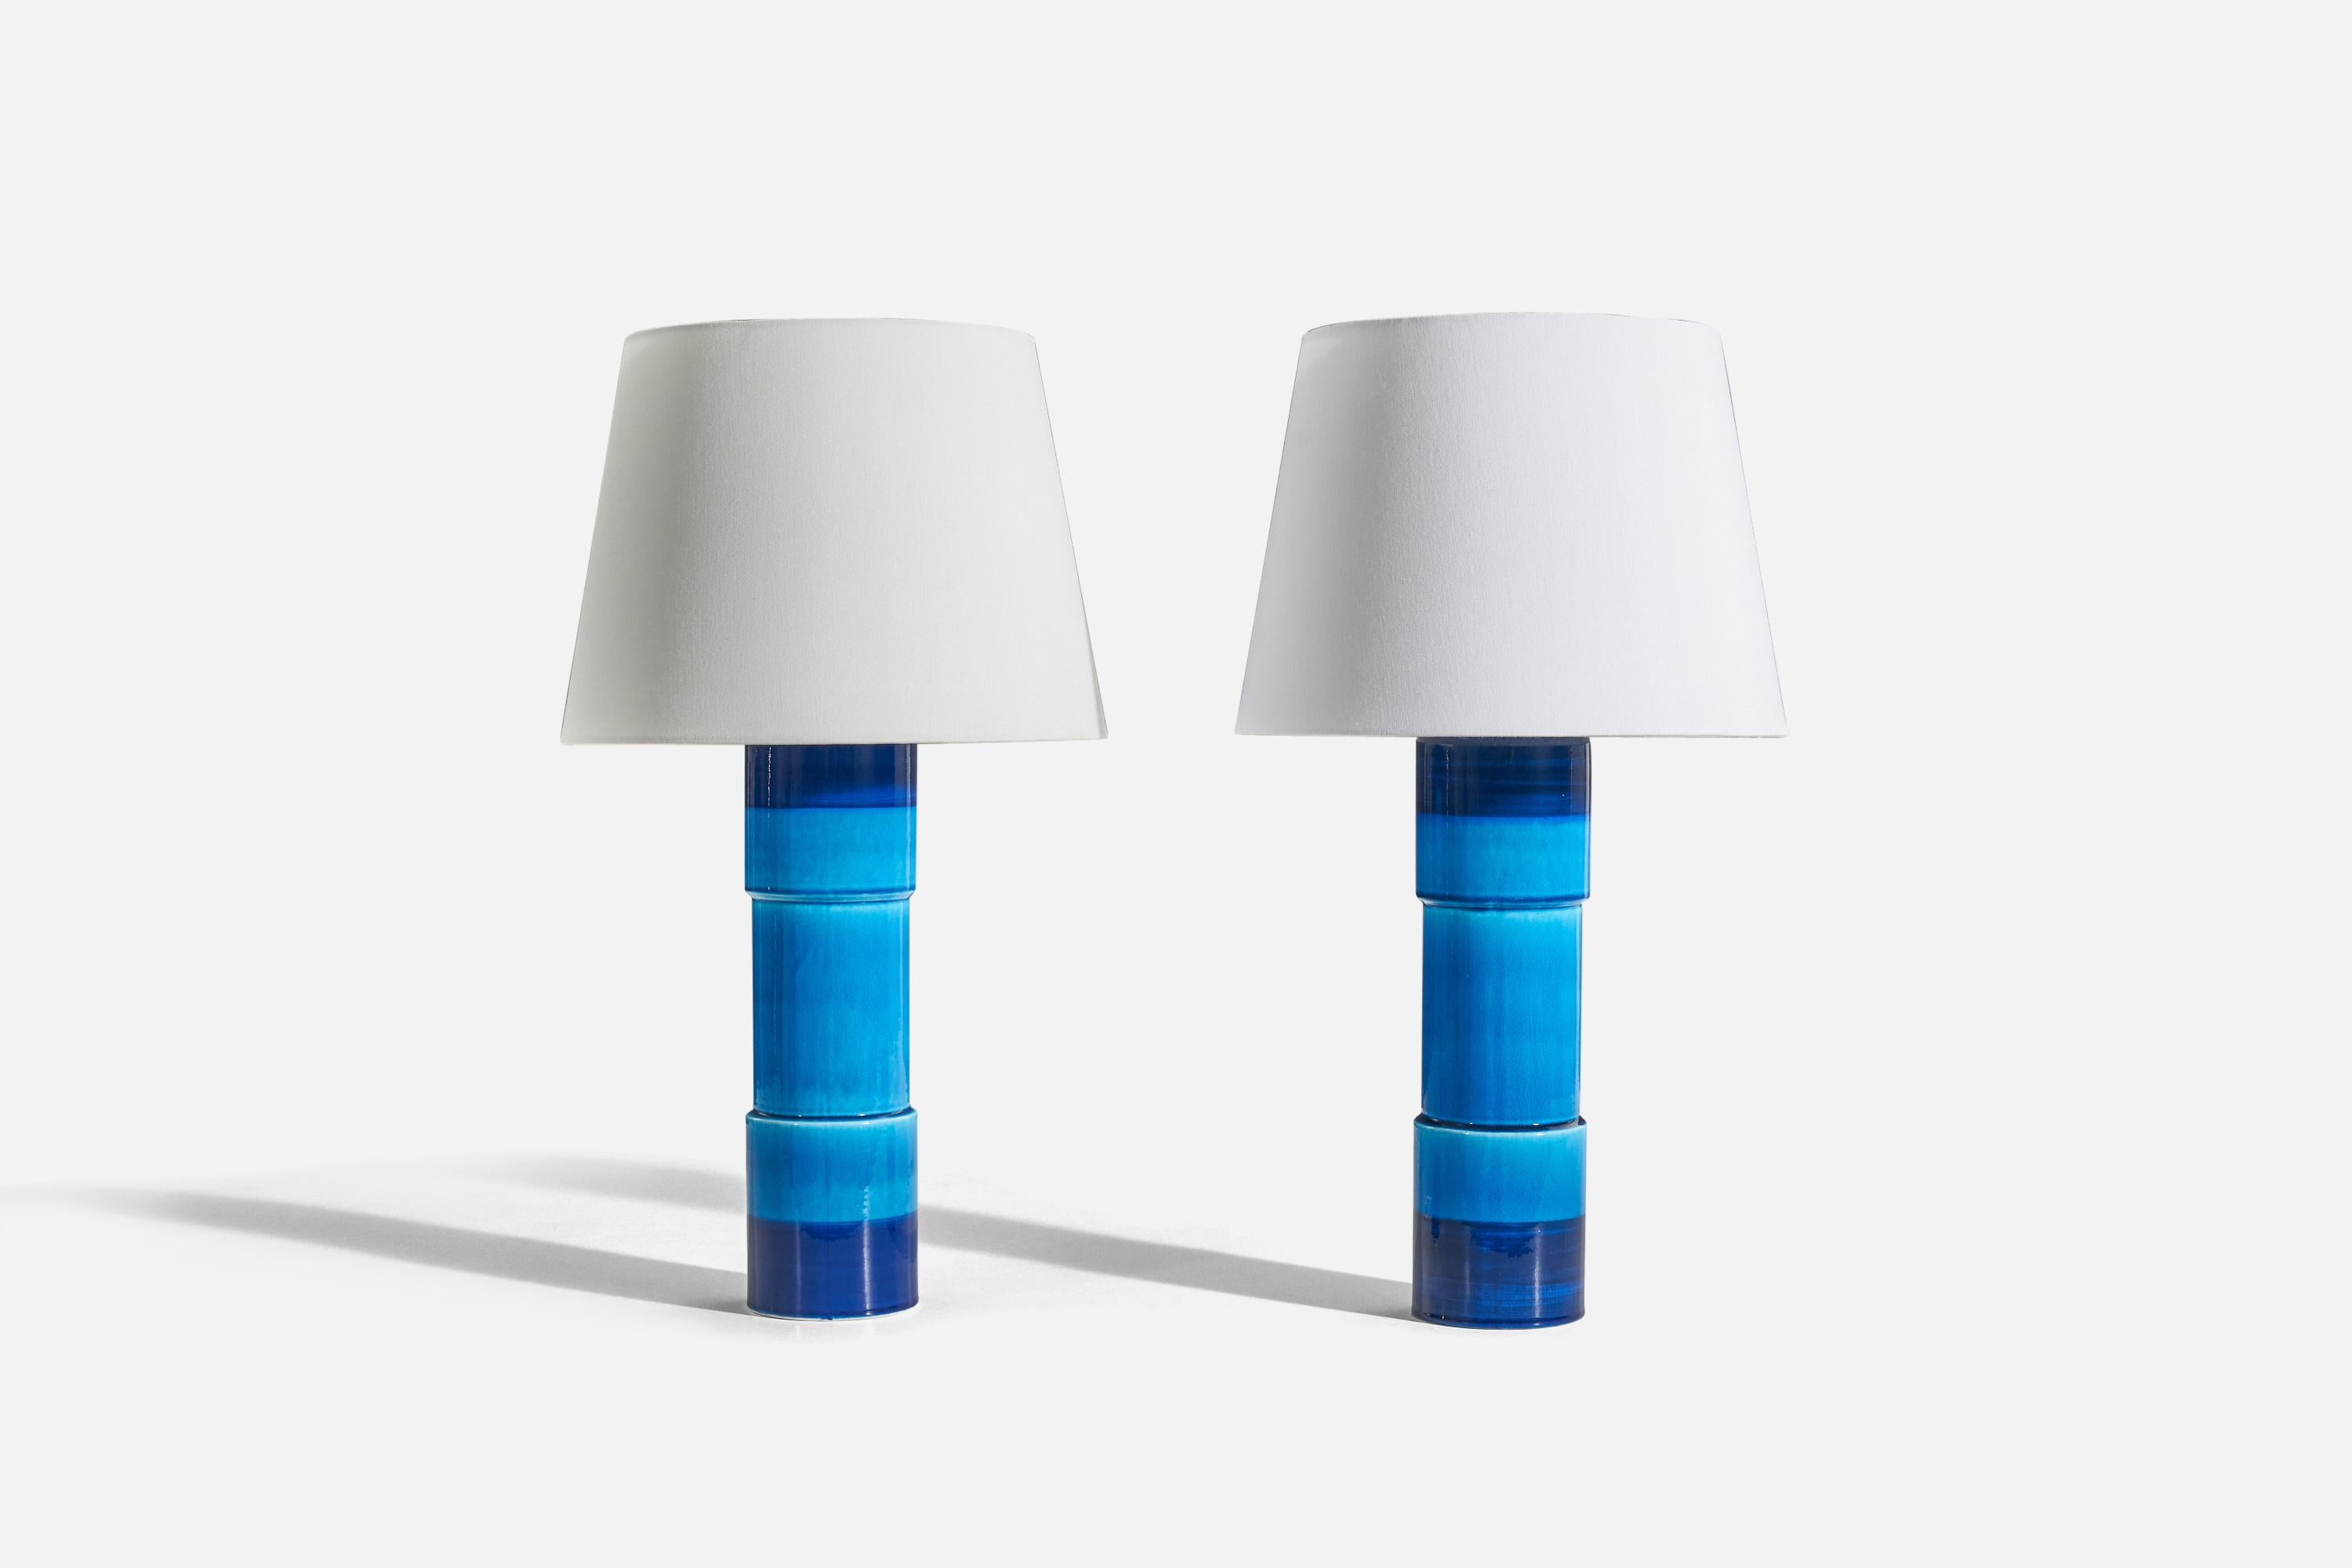 A pair of blue-glazed stoneware table lamp designed by Inger Persson and produced by Rörstrand, Sweden, c. 1960s.

Sold without lampshade. 
Dimensions of Lamp (inches) : 16.25 x 4 x 4 (H x W x D)
Dimensions of Shade (inches) : 9 x 12 x 9 (T x B